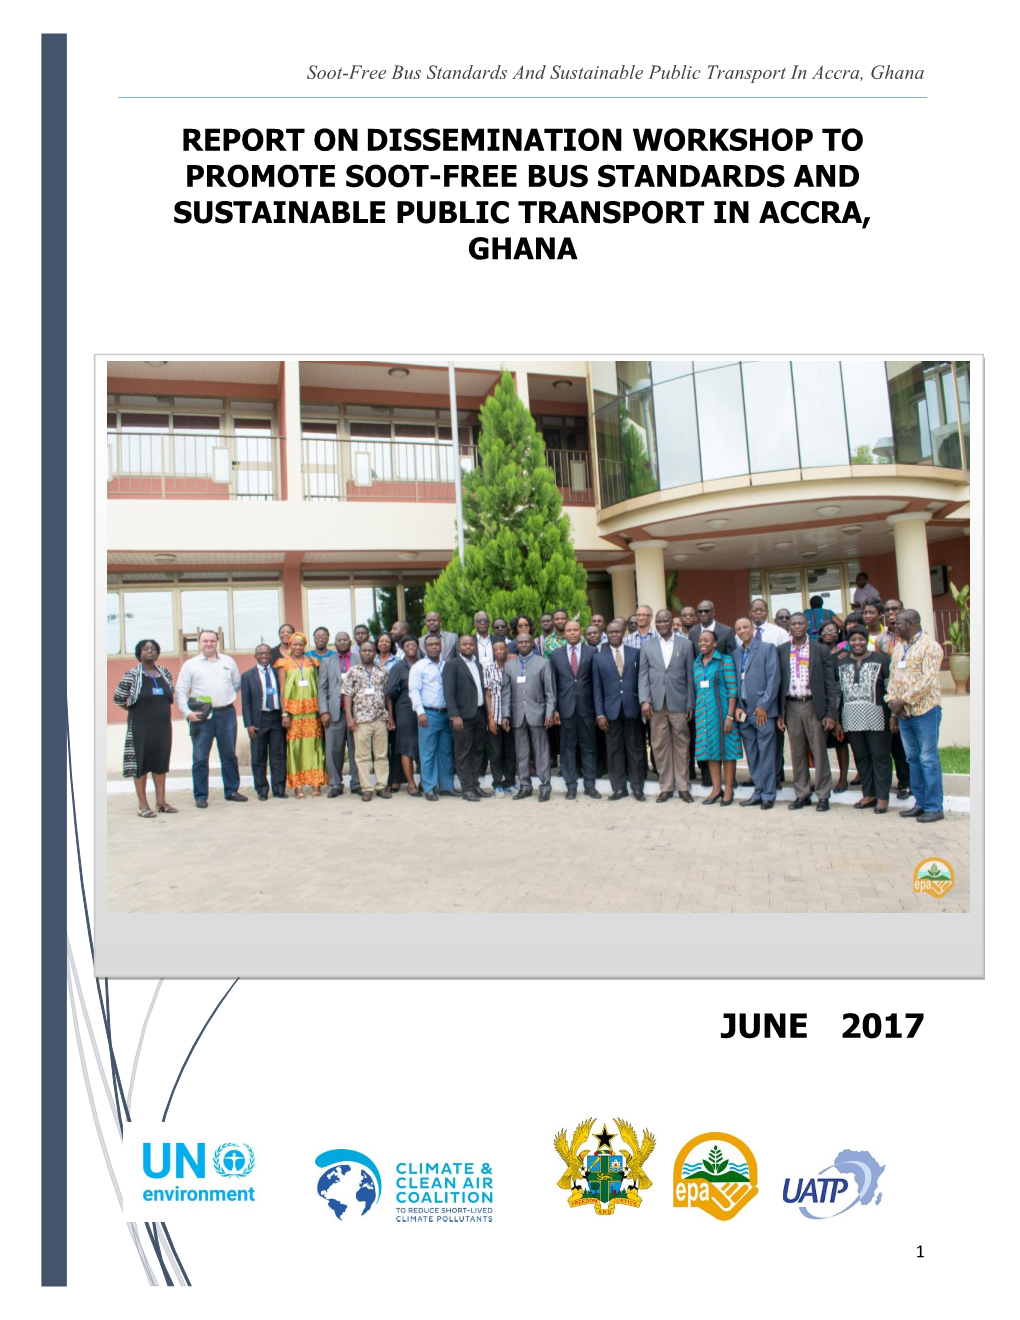 Report on Dissemination Workshop to Promote Soot-Free Bus Standards and Sustainable Public Transport in Accra, Ghana